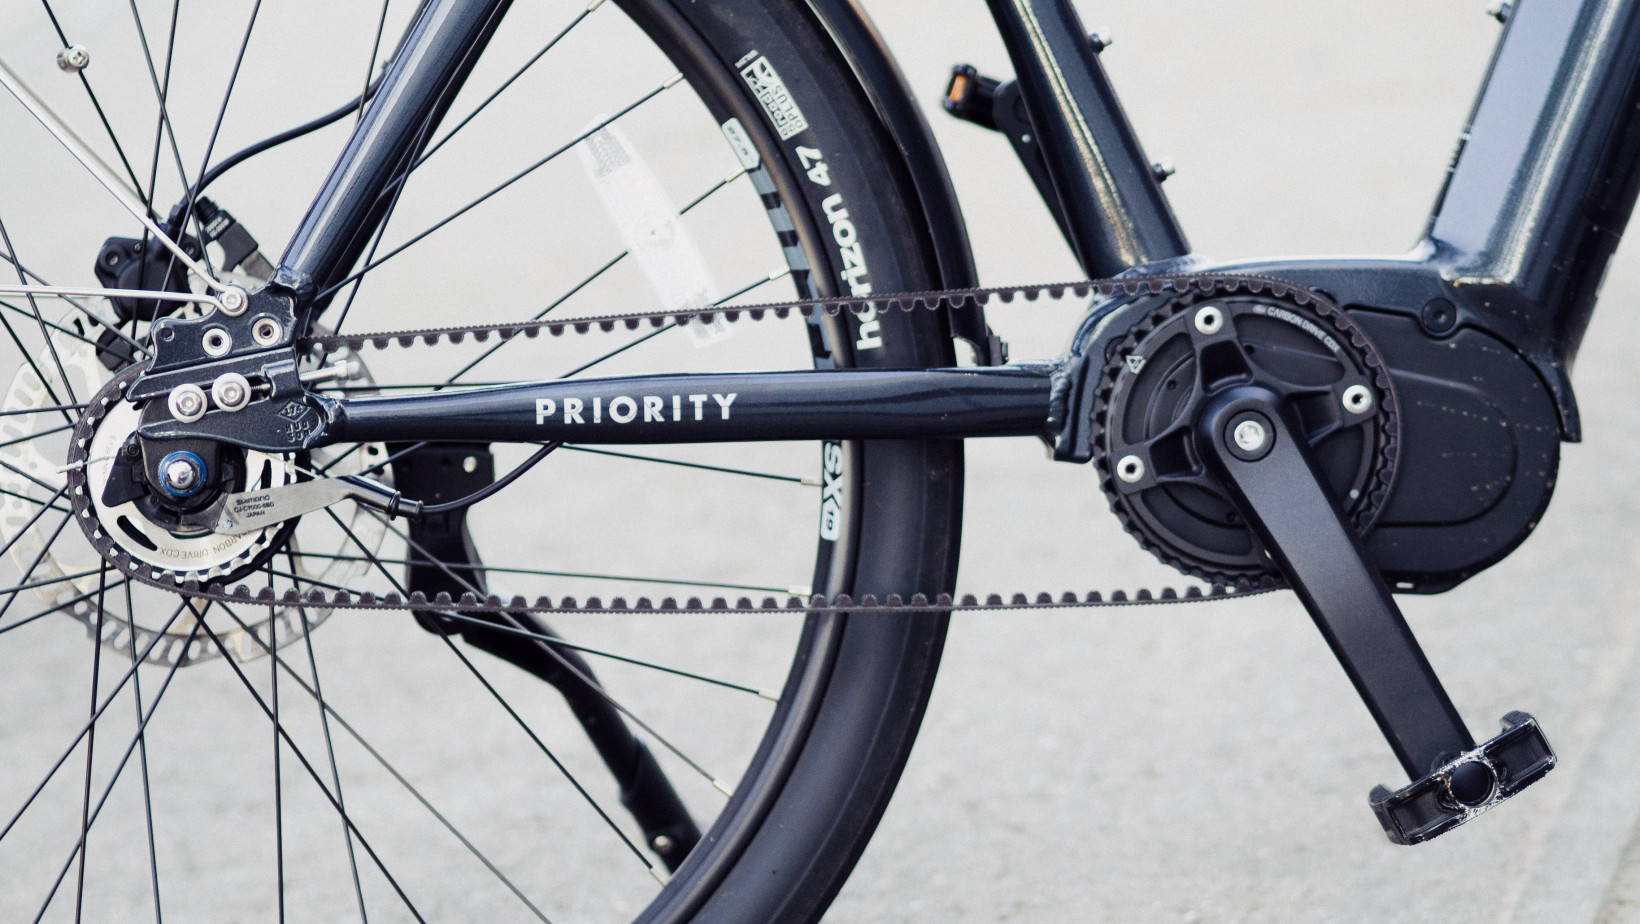 Belt drive vs chain: Which is best for your ebike?